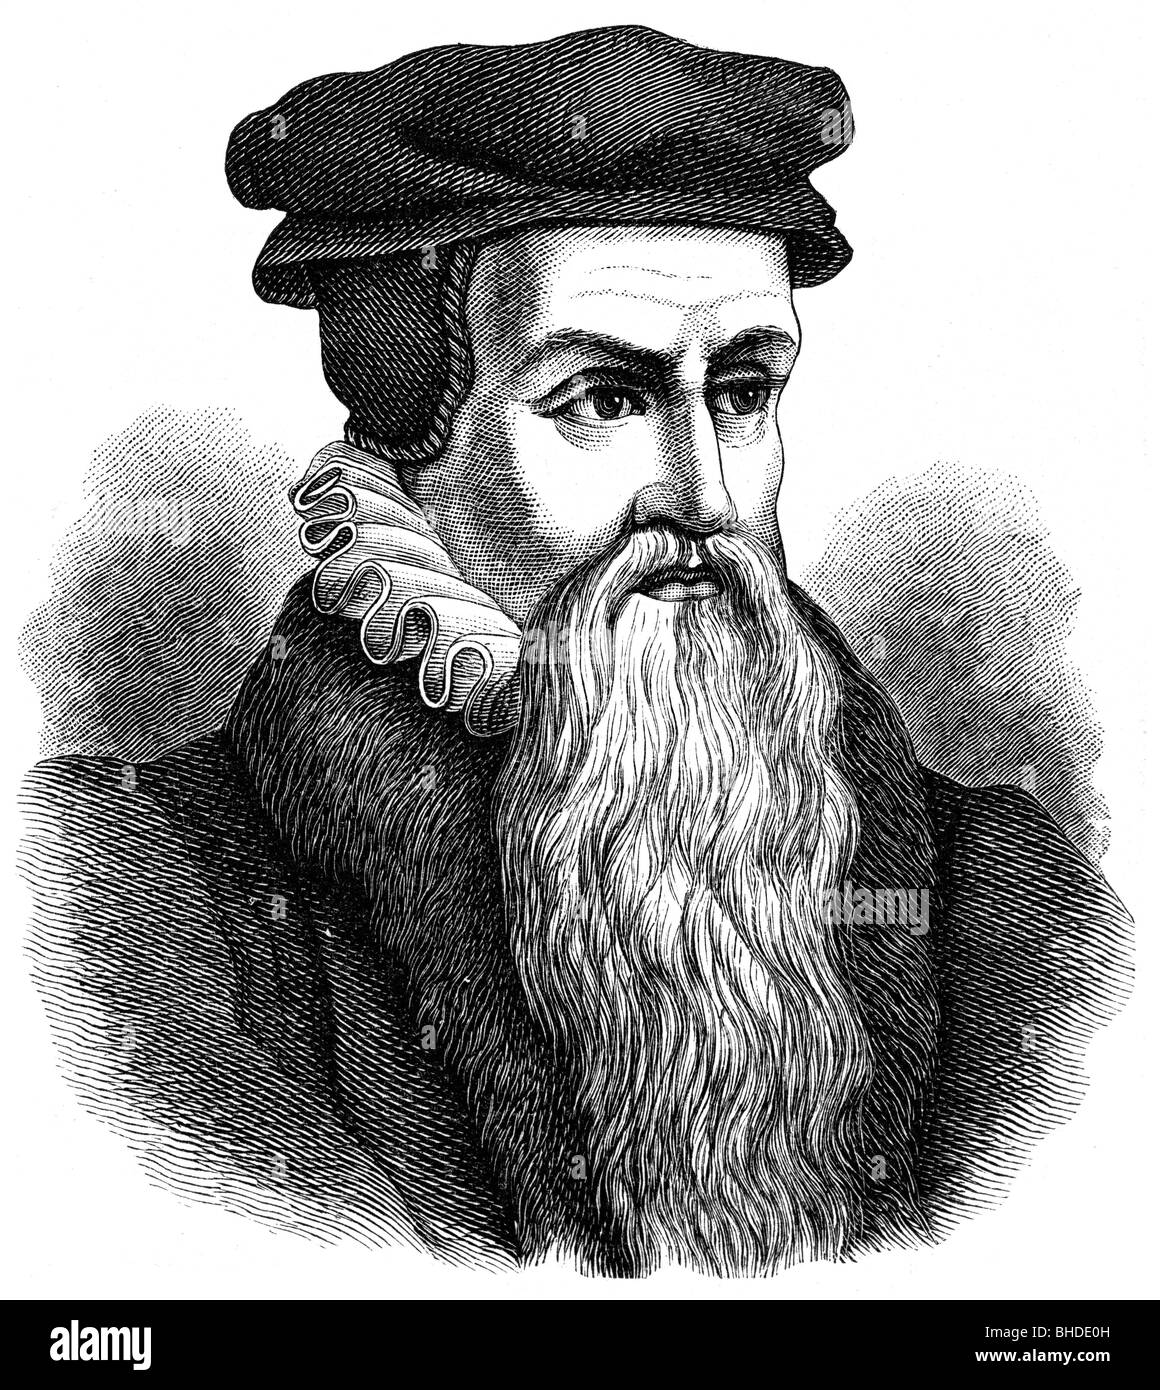 Beza, Theodore, 24.6.1519 - 13.10.1605, French humanist and reformer, portrait, wood engraving, 19th century, , Stock Photo